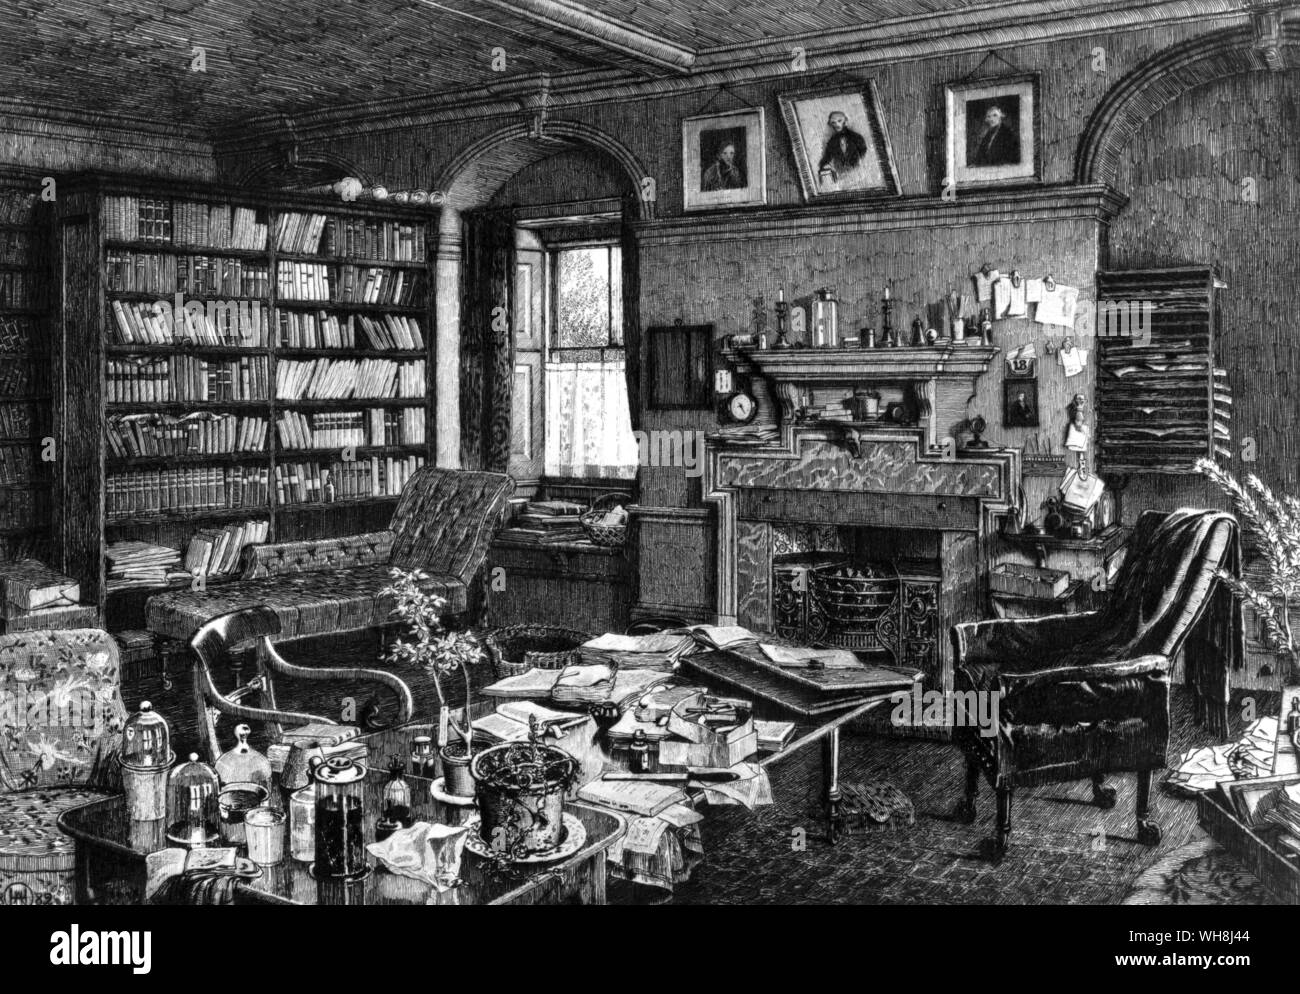 The new study at Down House. It was at Down House that Charles Darwin (1809-1882) worked on his scientific theories and wrote On the Origin of Species by Means of Natural Selection. Darwin and the Beagle by Alan Moorhead, page 256. Stock Photo